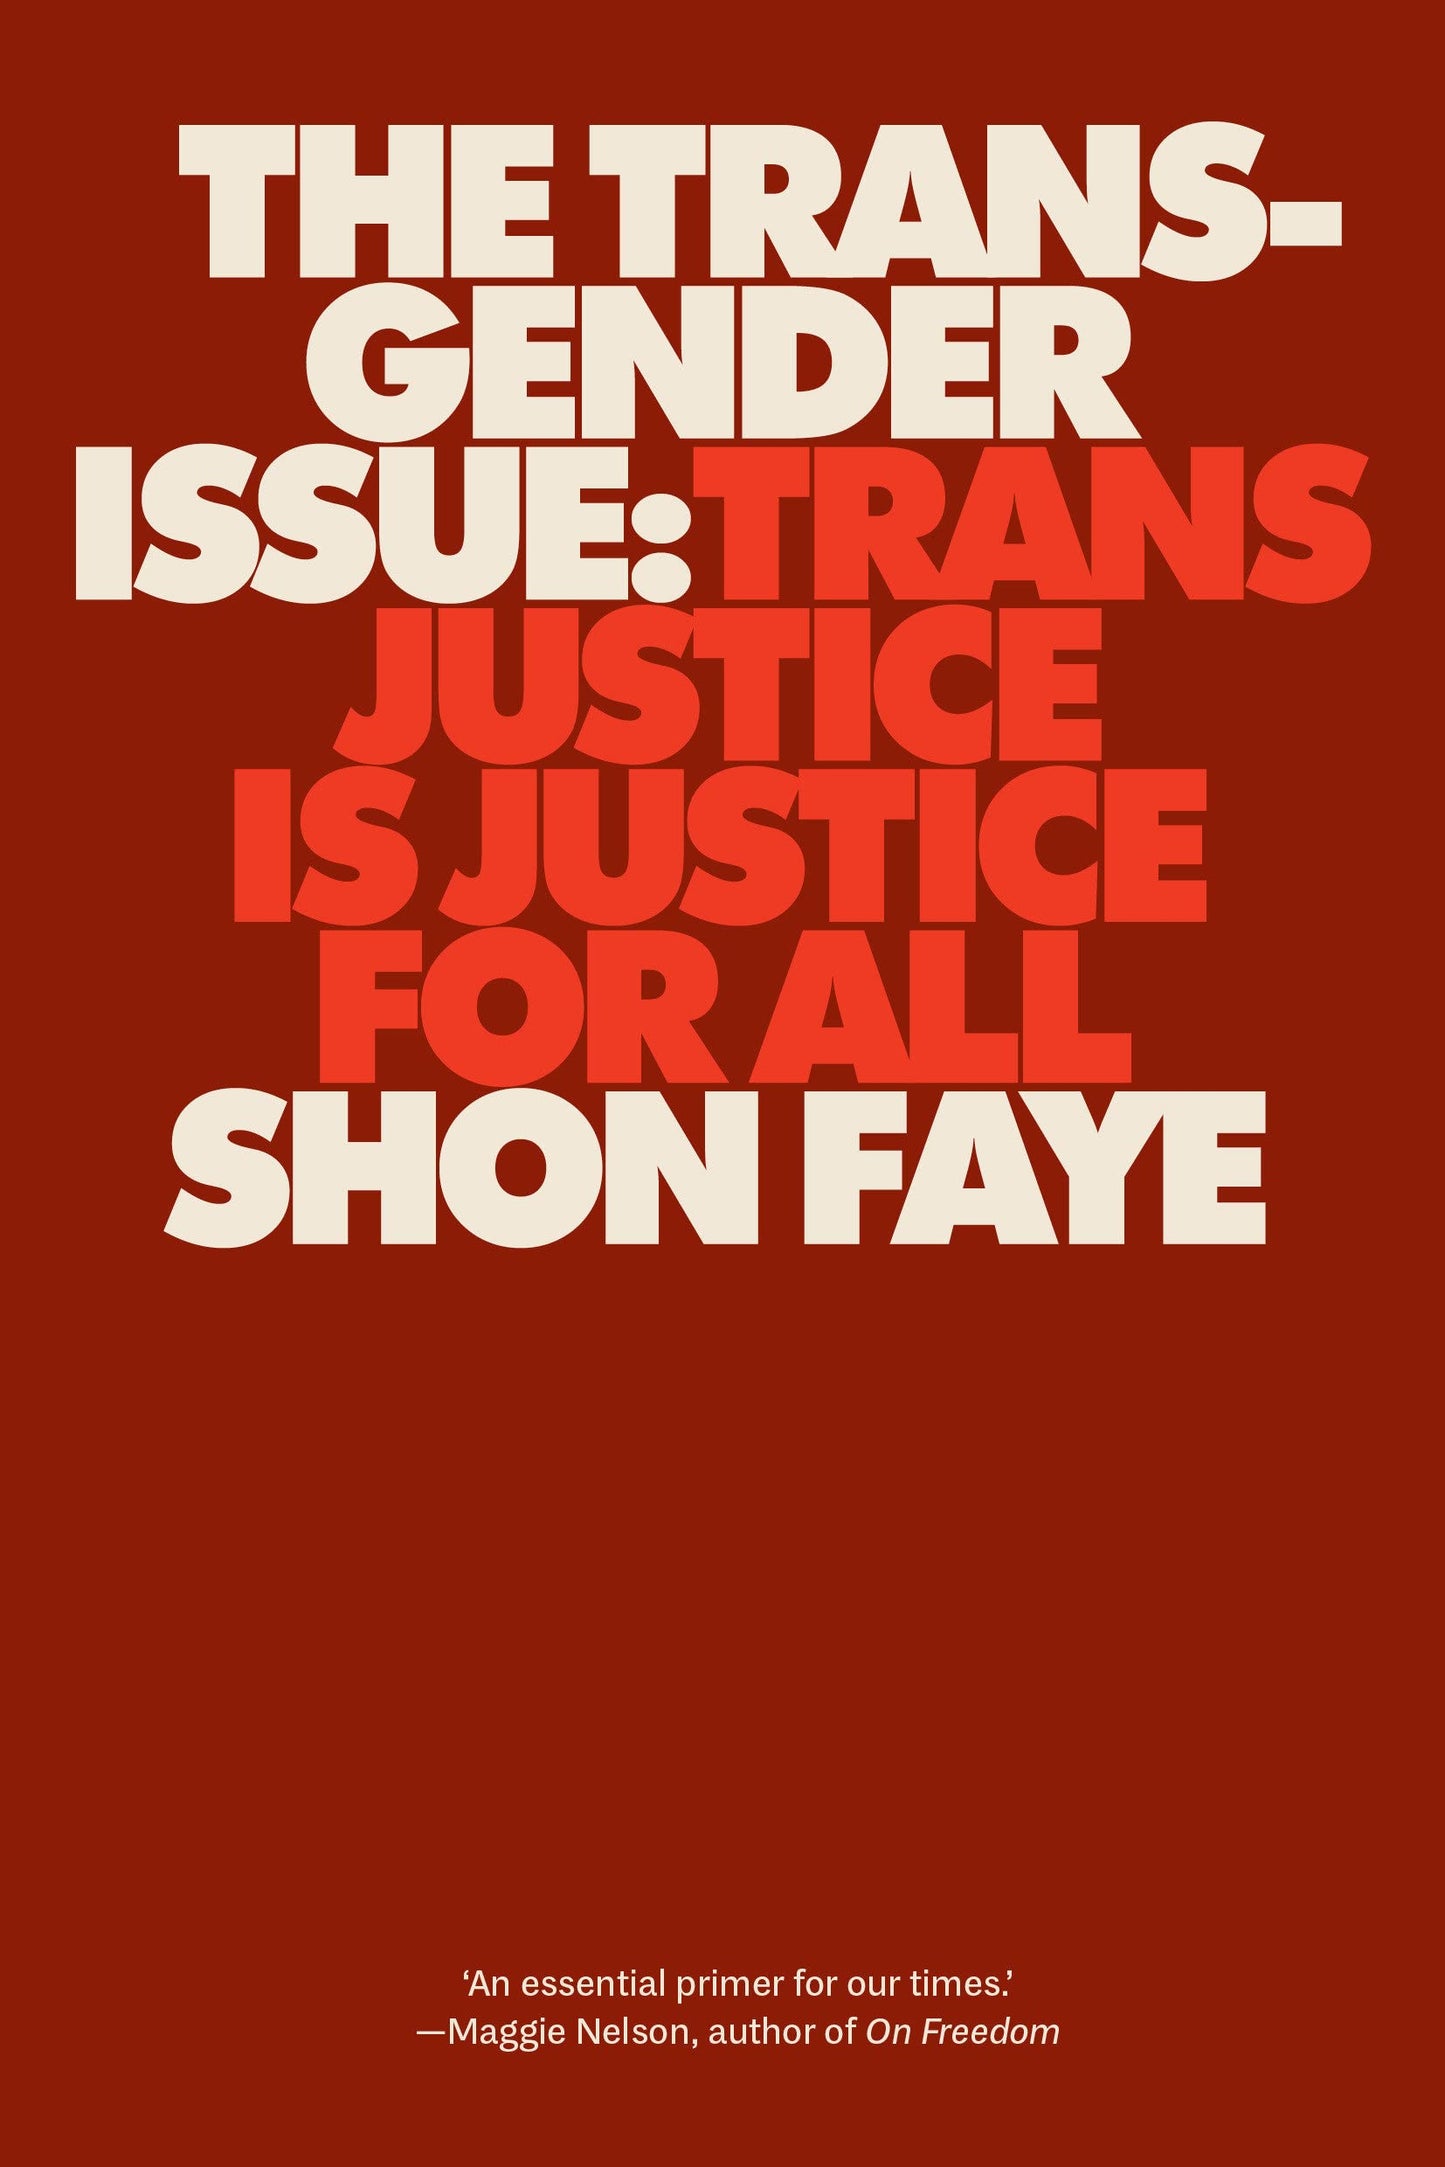 The Transgender Issue: Trans Justice is Justice for All, by Shon Faye